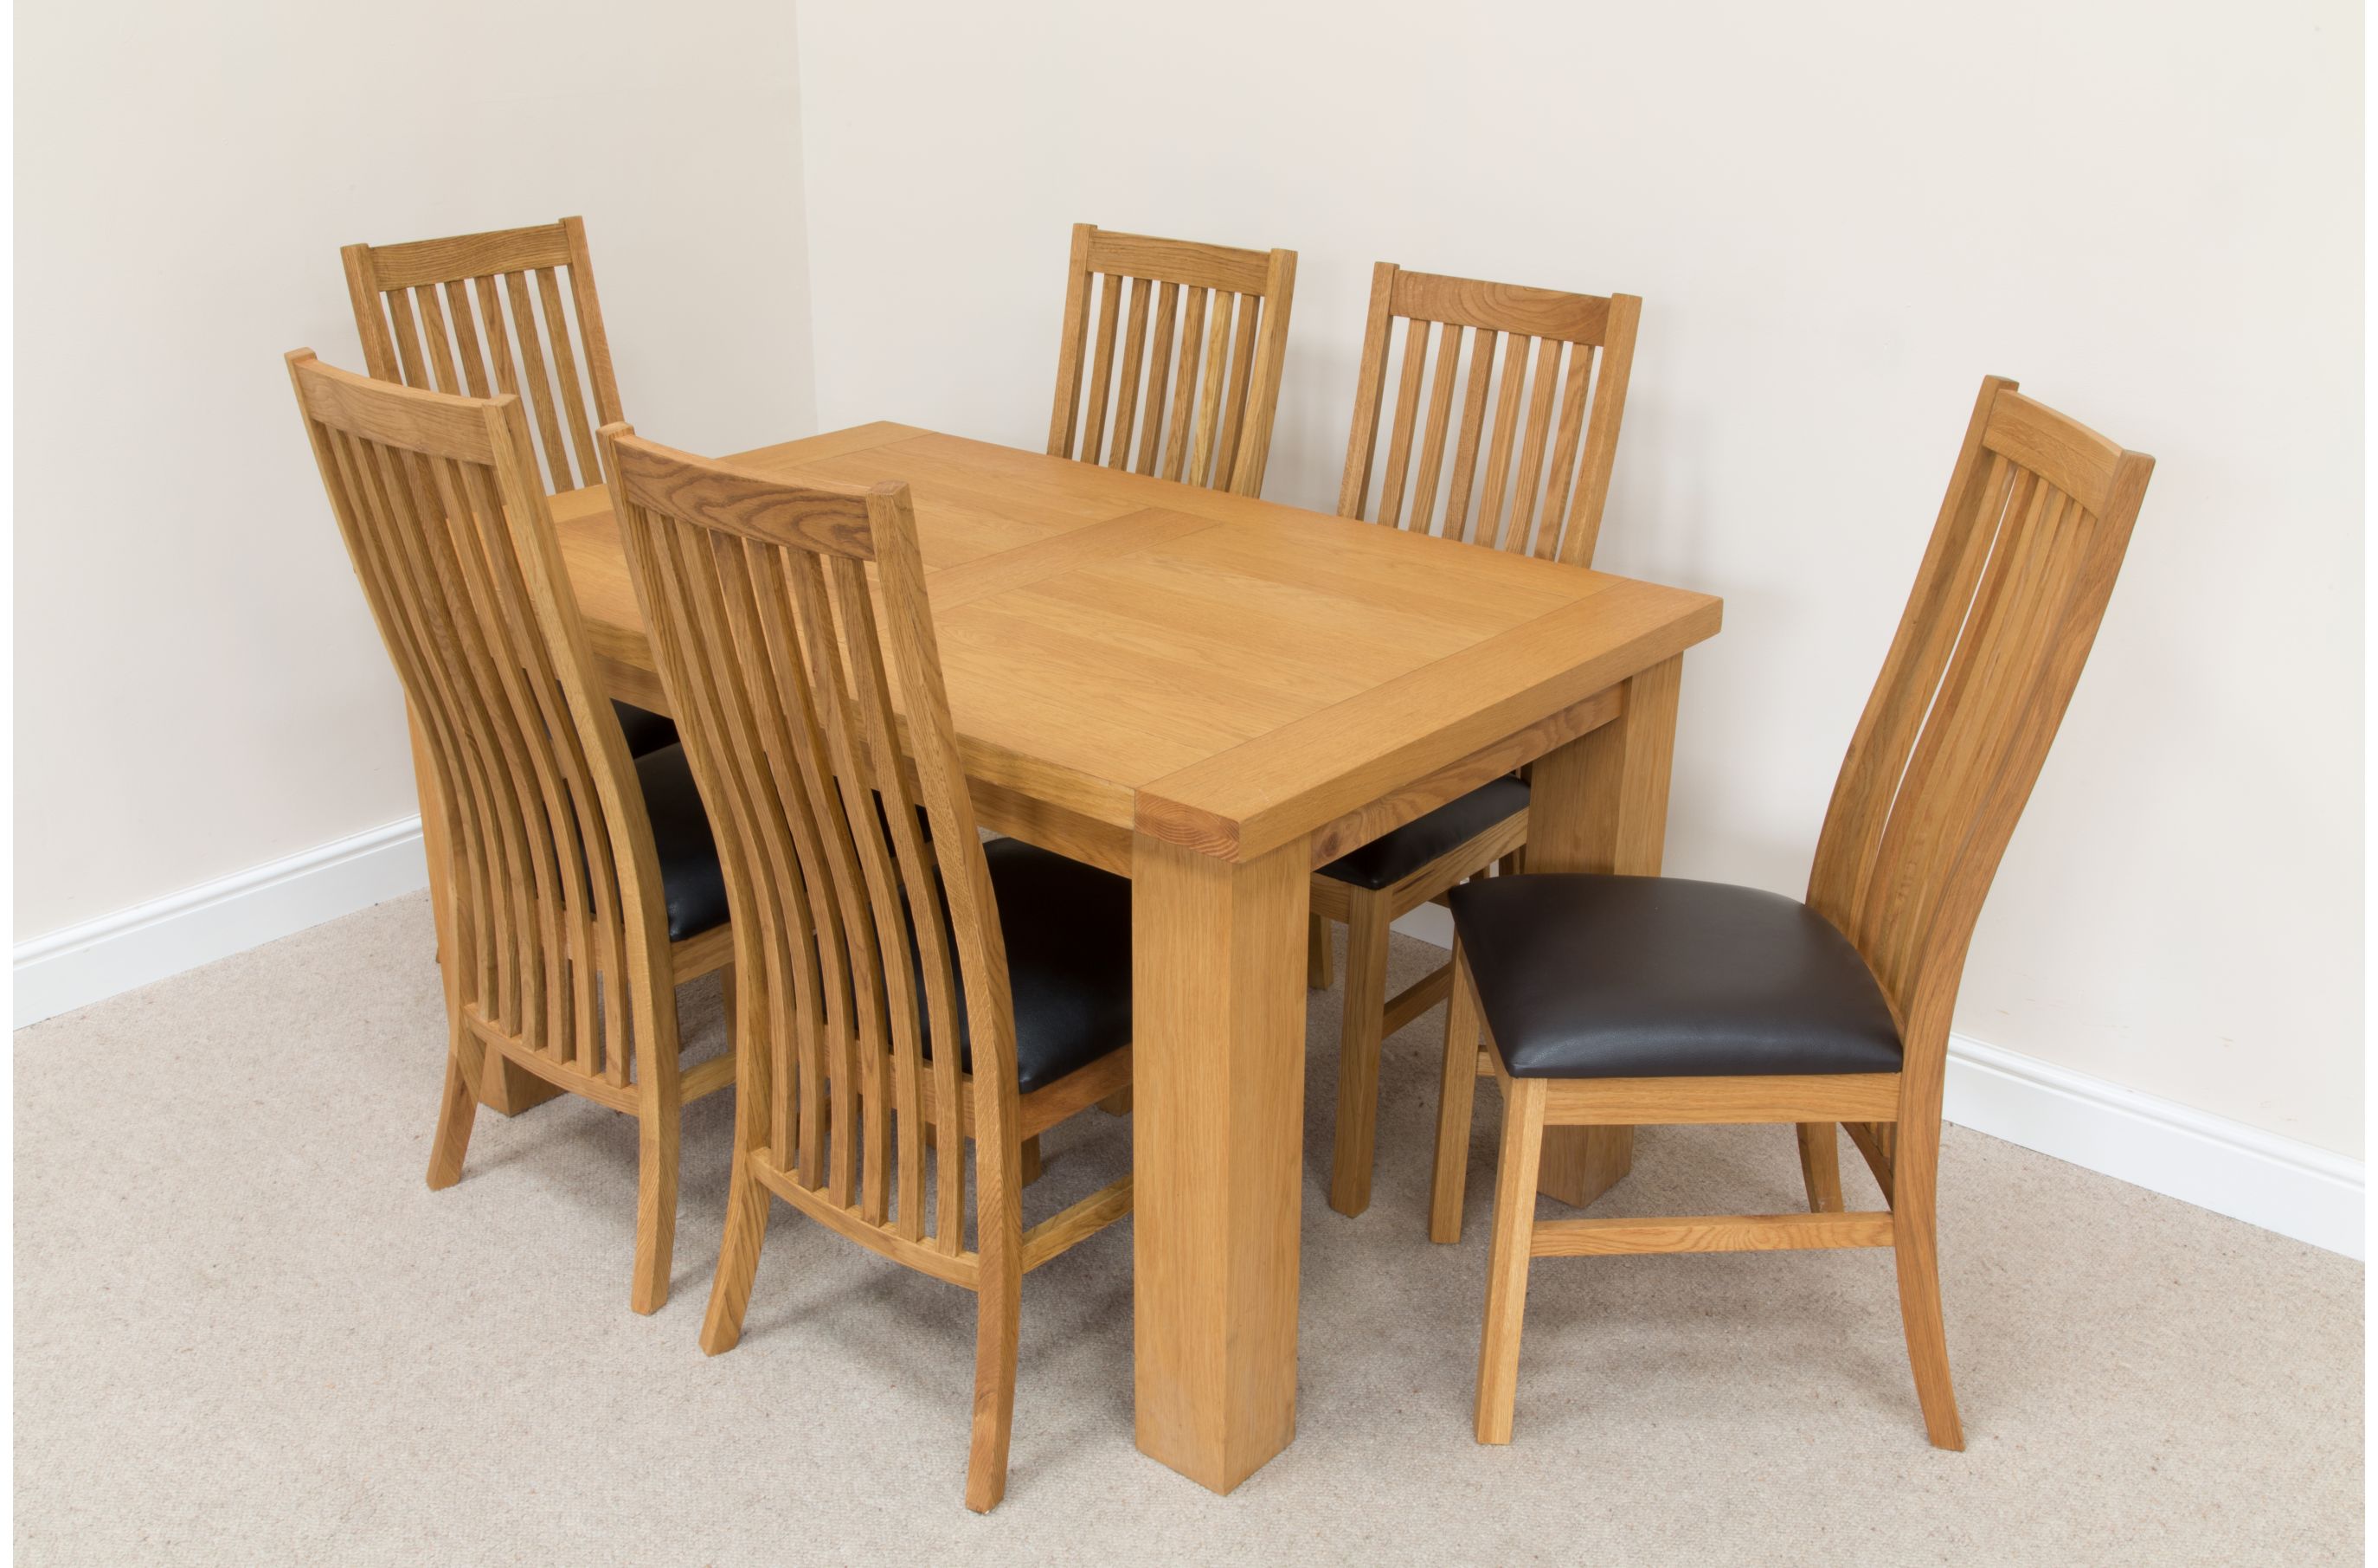 oak dining sets oak dining table and chairs uk home extending 8 interior design: full size ZSFXCZU